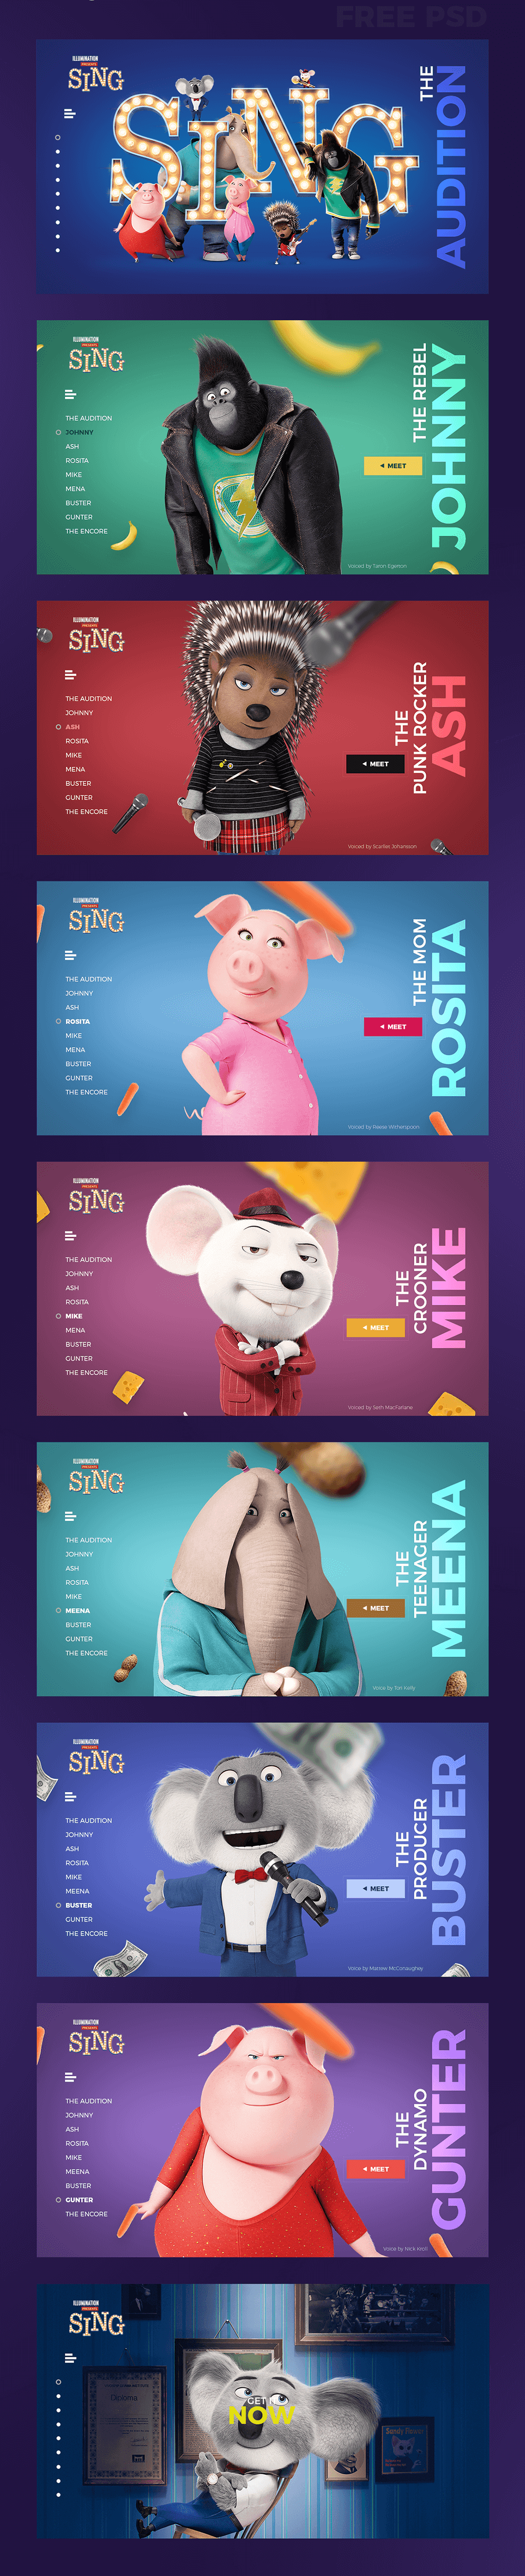 sing-movie-characters-psd-full